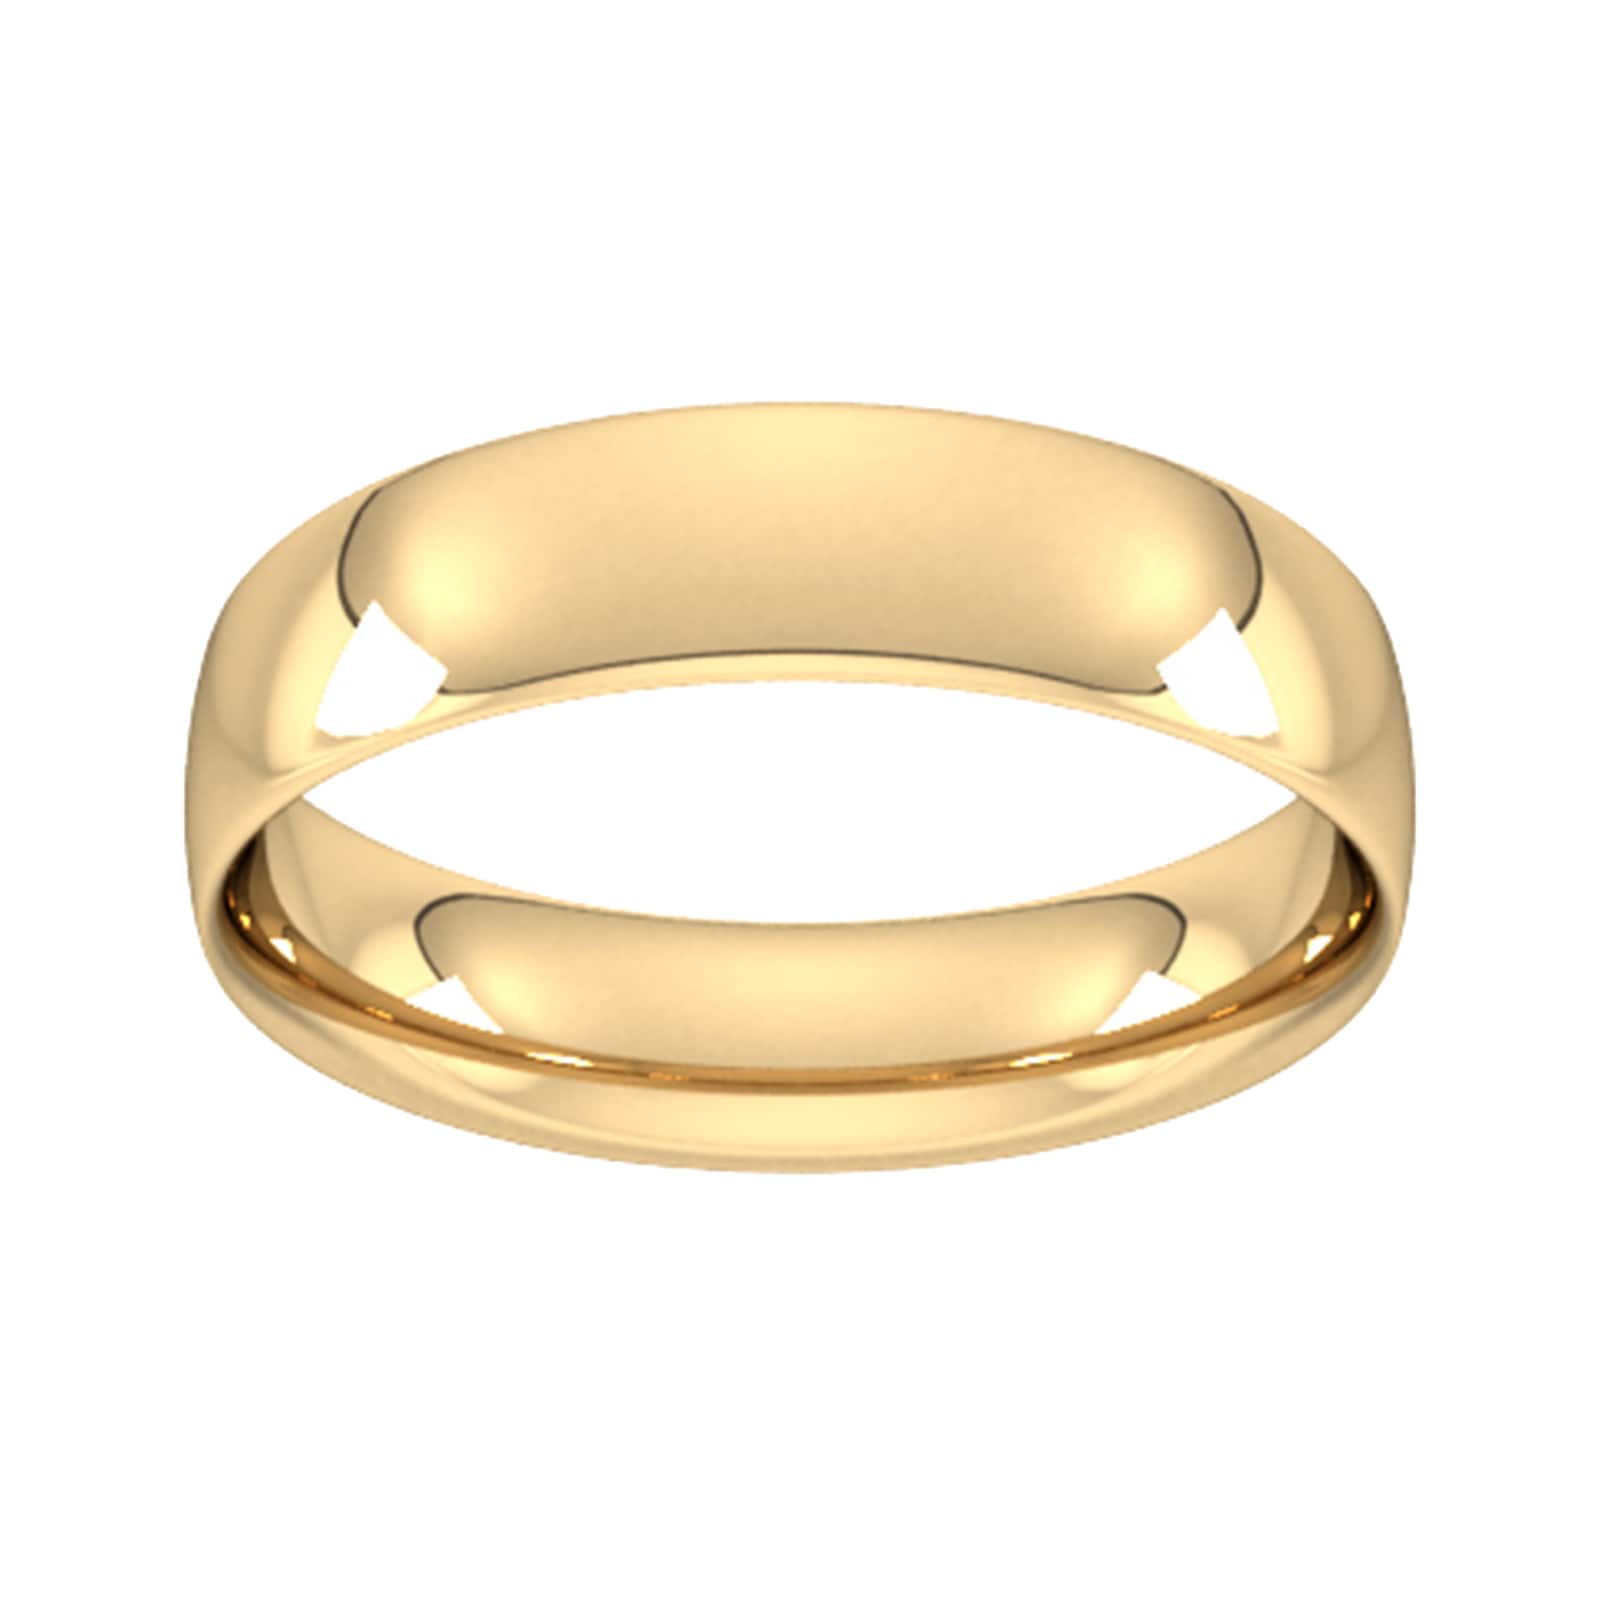 5mm Traditional Court Standard Wedding Ring In 9 Carat Yellow Gold - Ring Size T